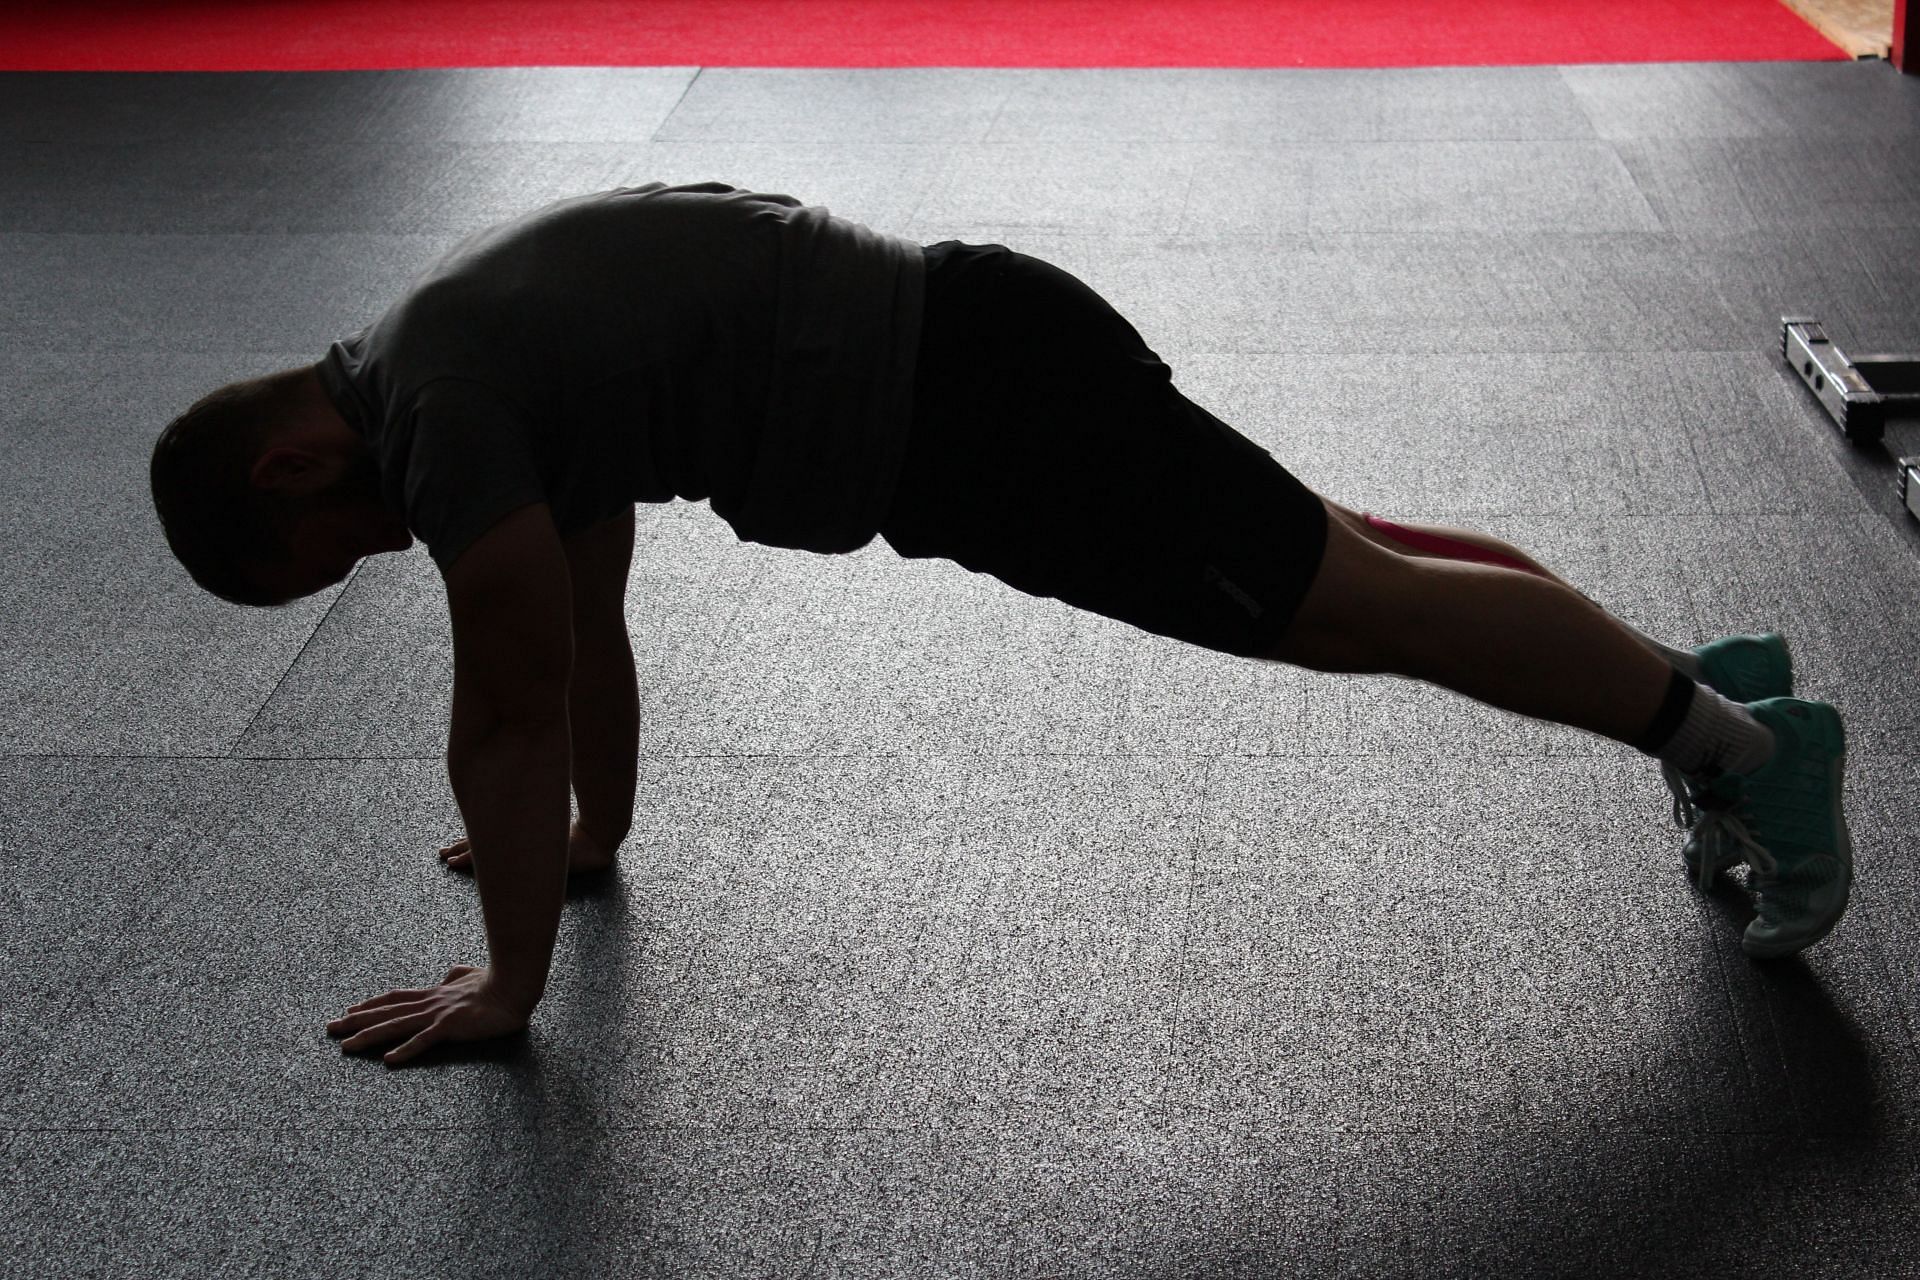 Pike Push Up Muscles Worked And The 4 Main Exercise Benefits